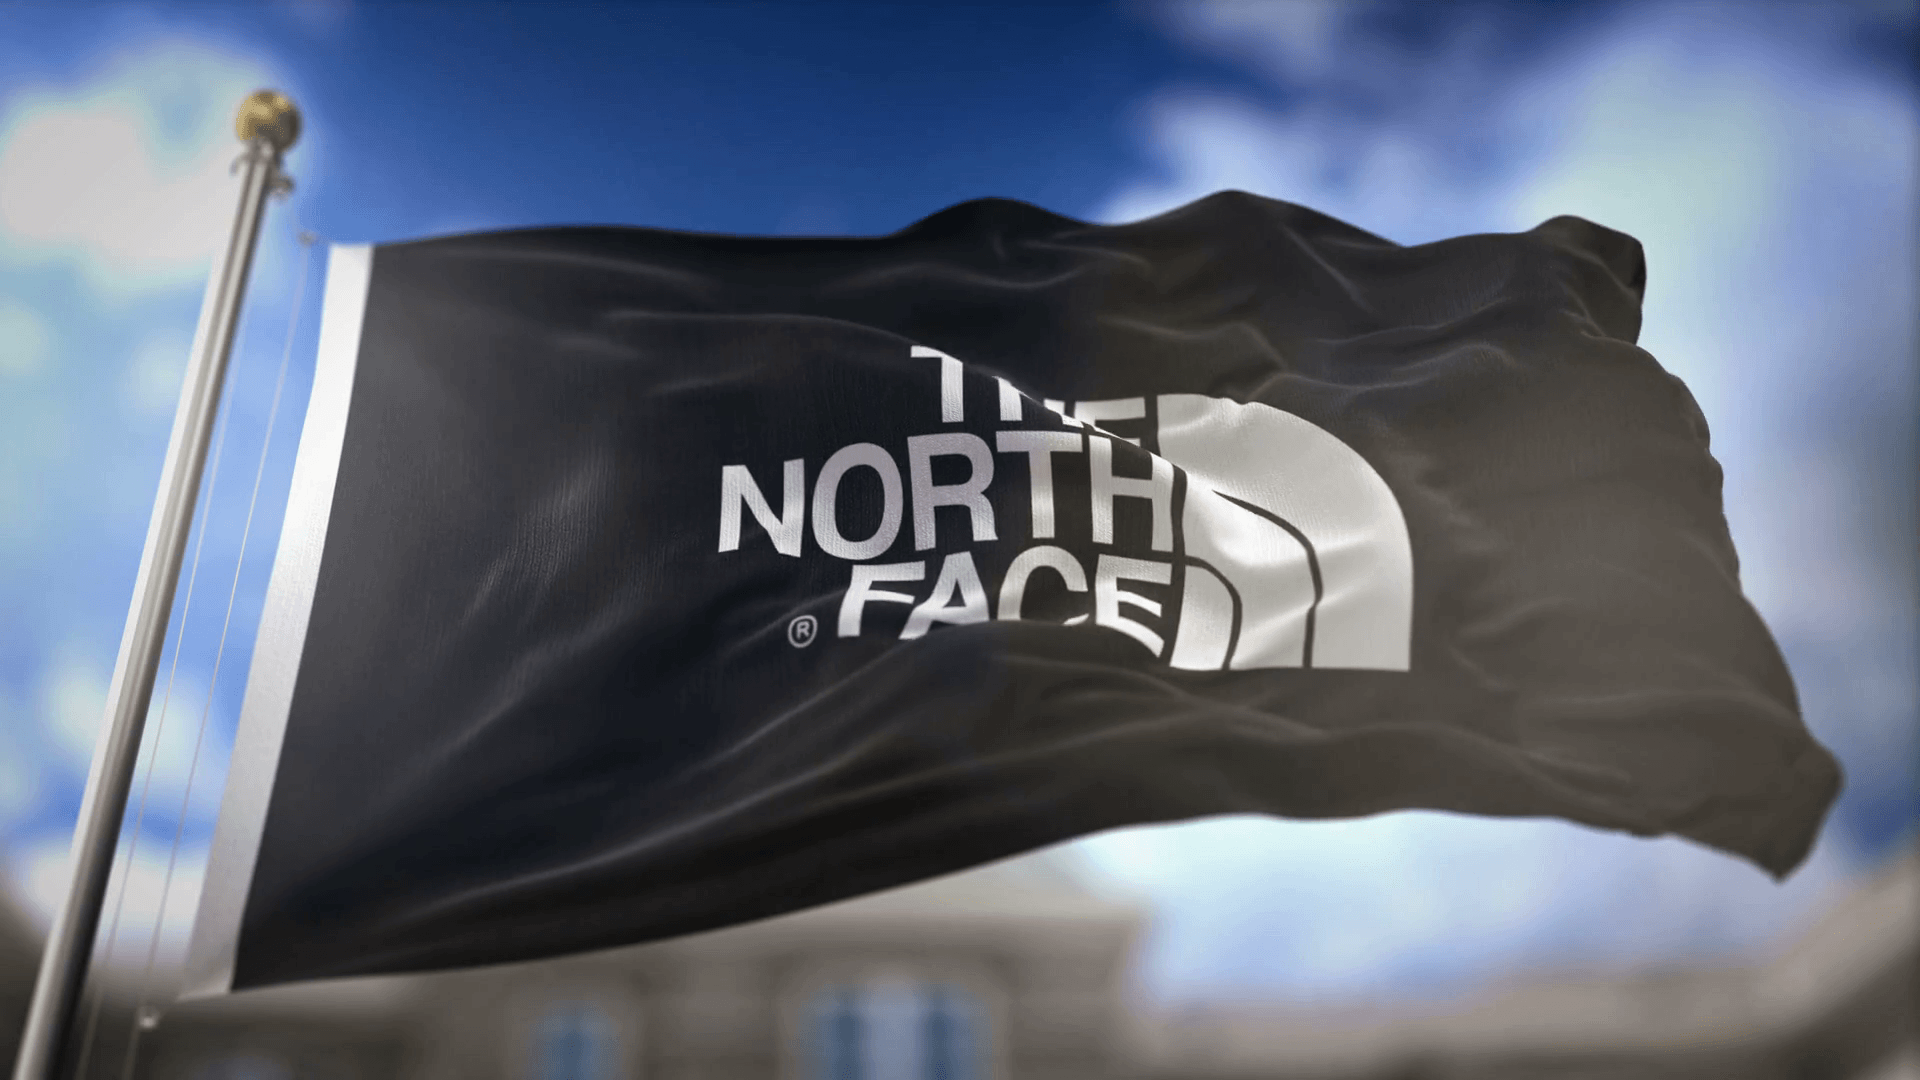 The North Face Black Flag Waving Slow Motion 3D Rendering Blue Sky